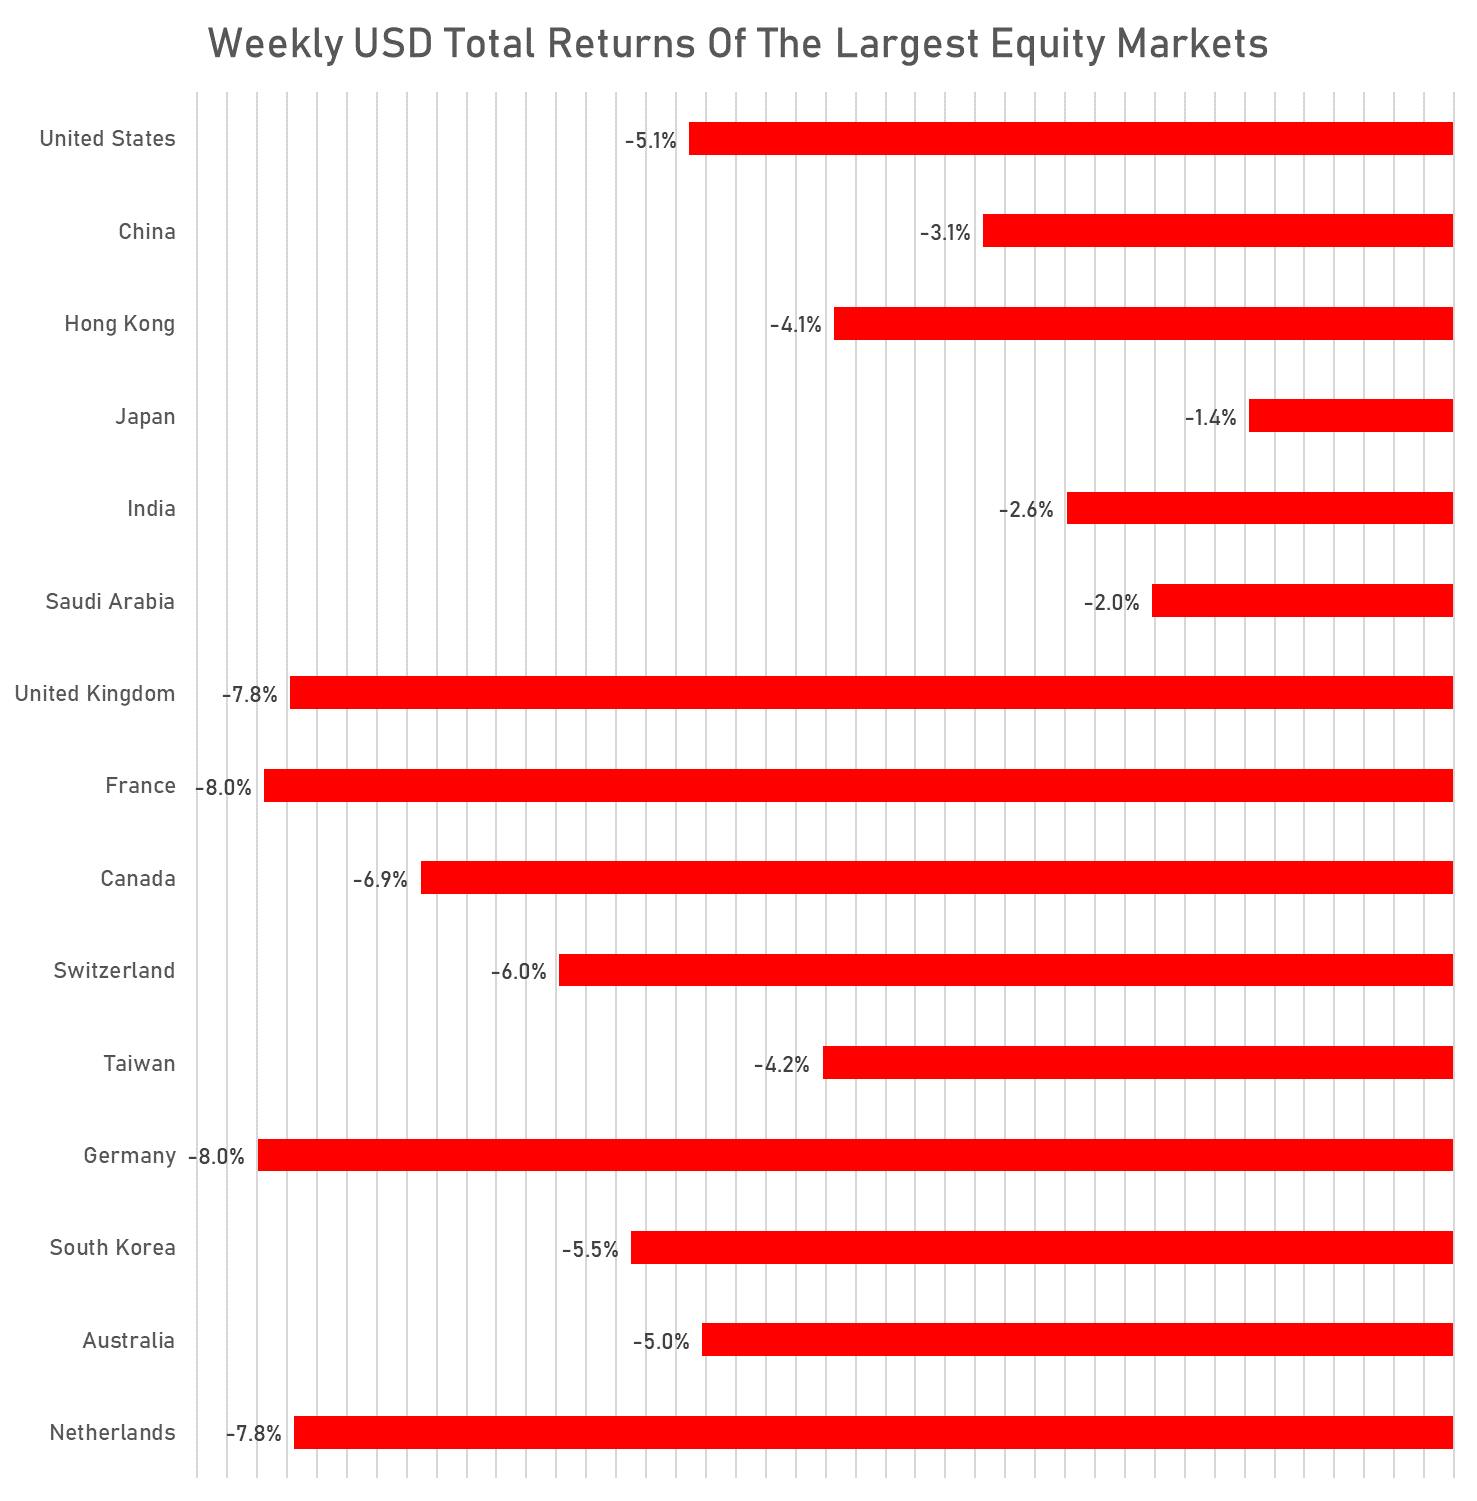 Weekly USD Total Returns of Major Global Markets | Sources: phipost.com, FactSet data